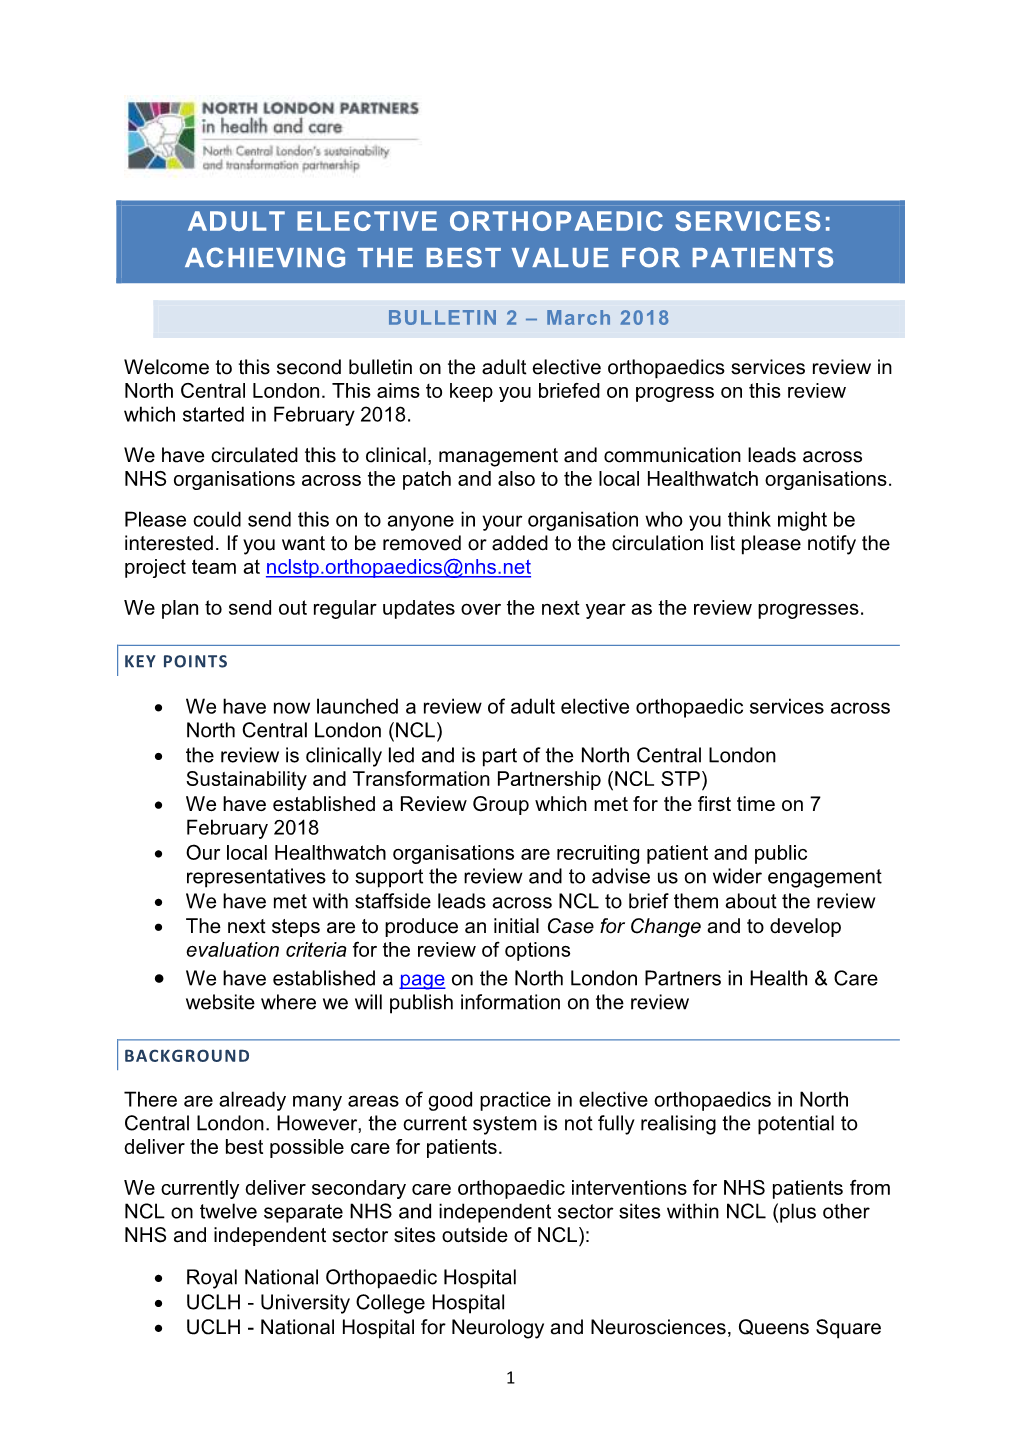 Adult Elective Orthopaedic Services: Achieving the Best Value for Patients